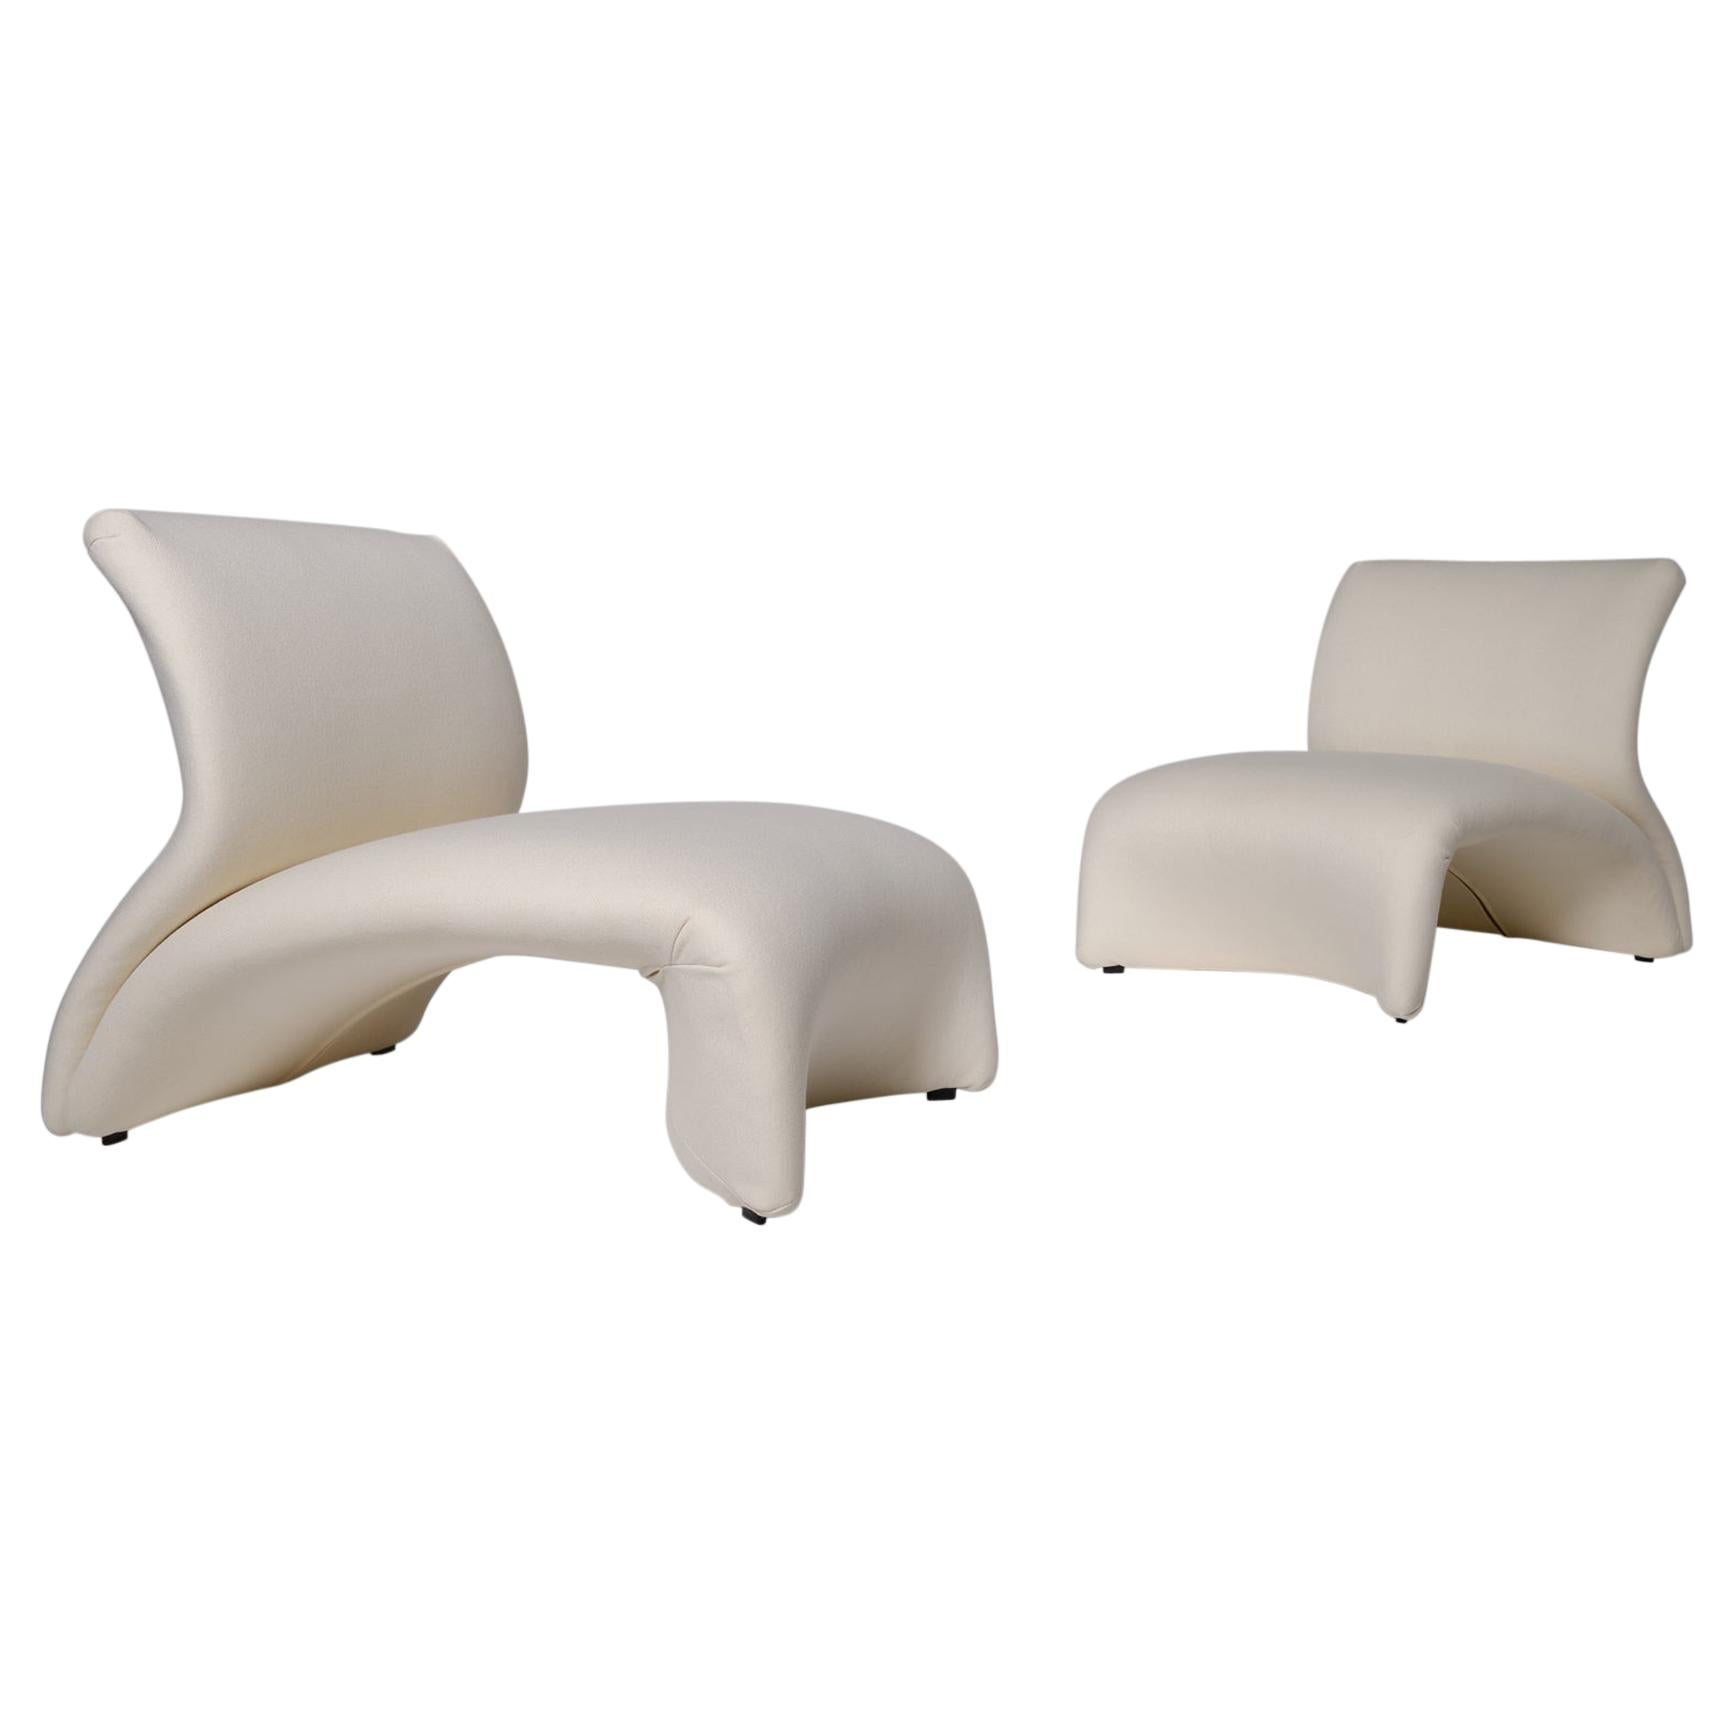 Pair of ‘Kaïdo’ Lounge Chairs by Kwok Hoï Chan for Steiner, 1968